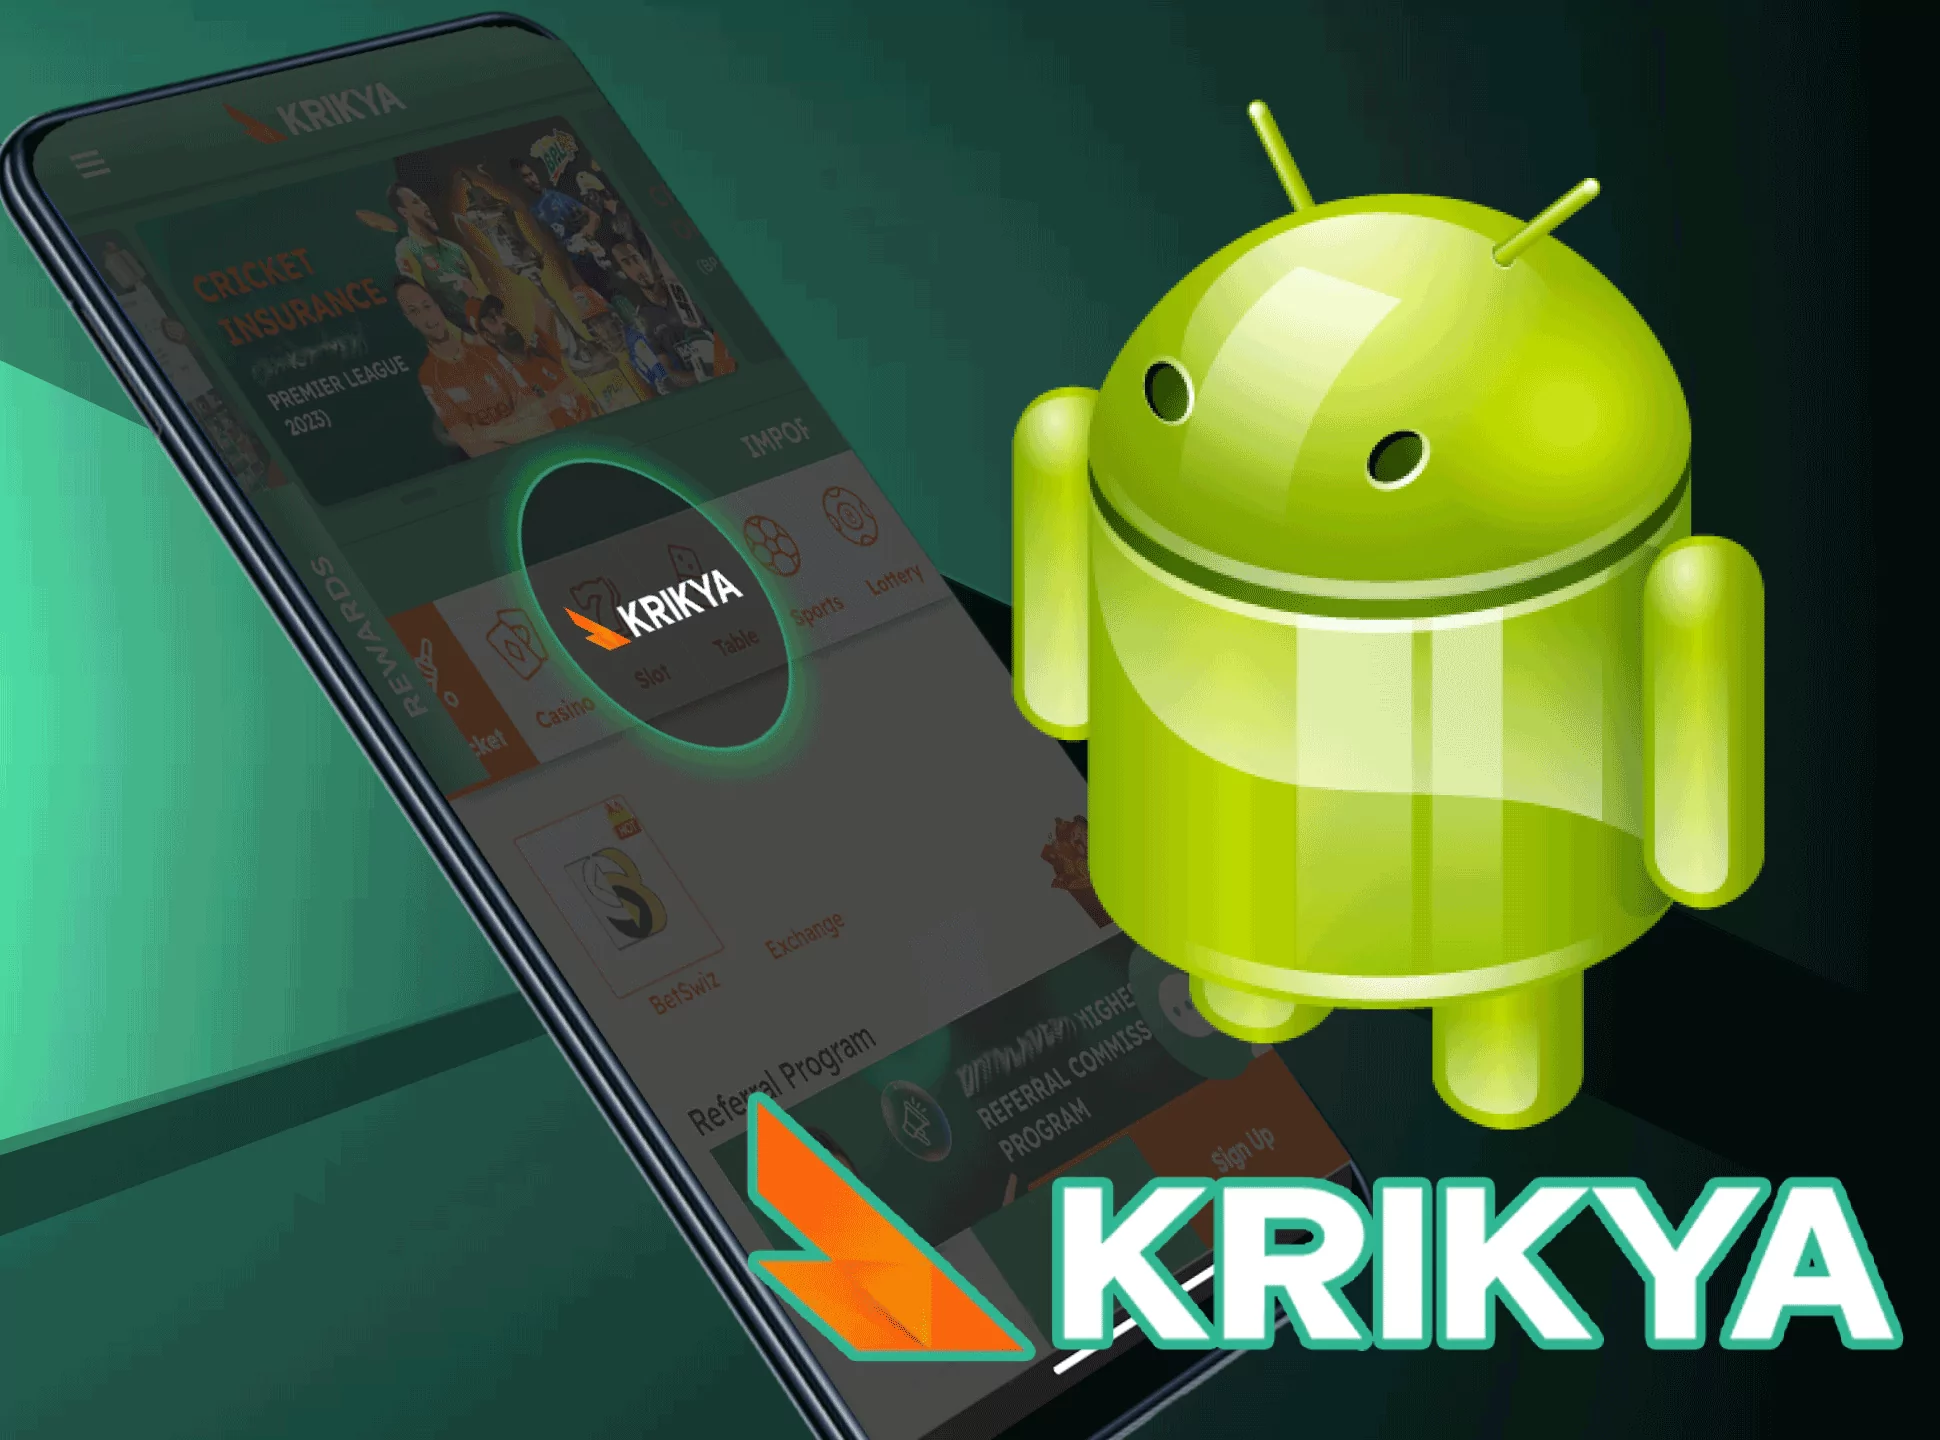 Krikya has designed a mobile Android app with all the neccessary features.